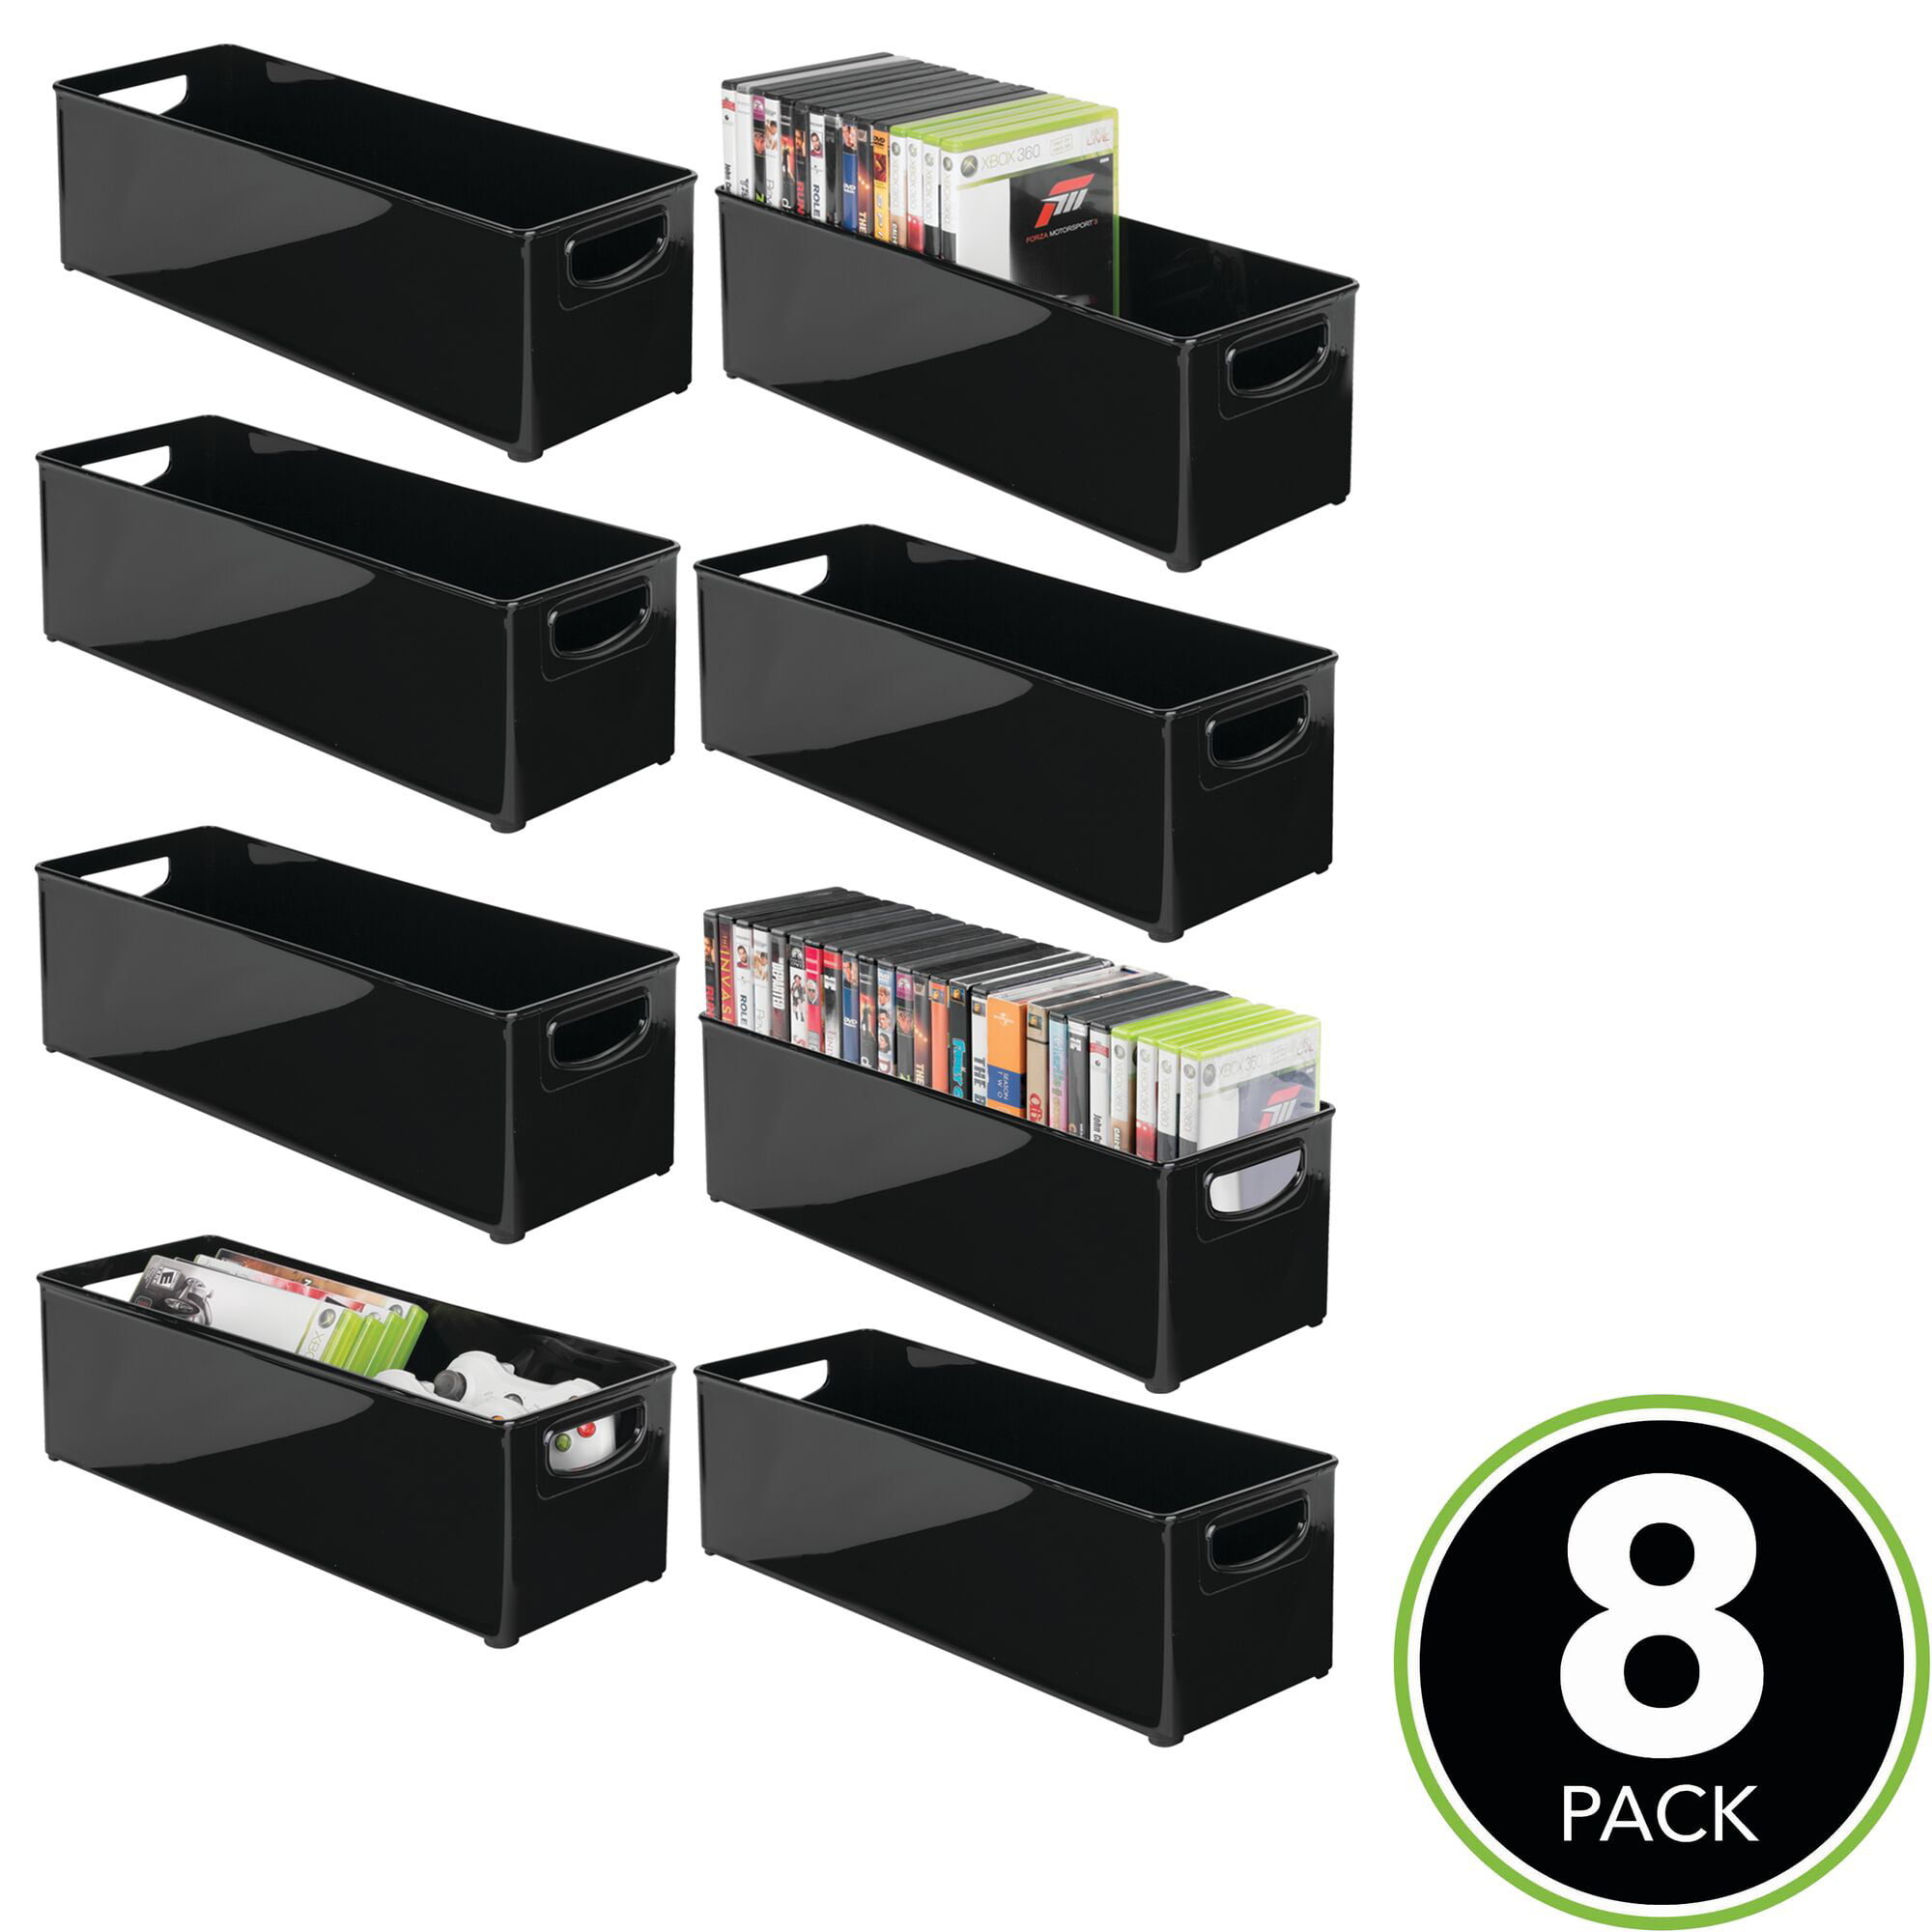 8 Pack Video Games Clear Details about   mDesign Stackable Storage Bin for DVDs Accessories 